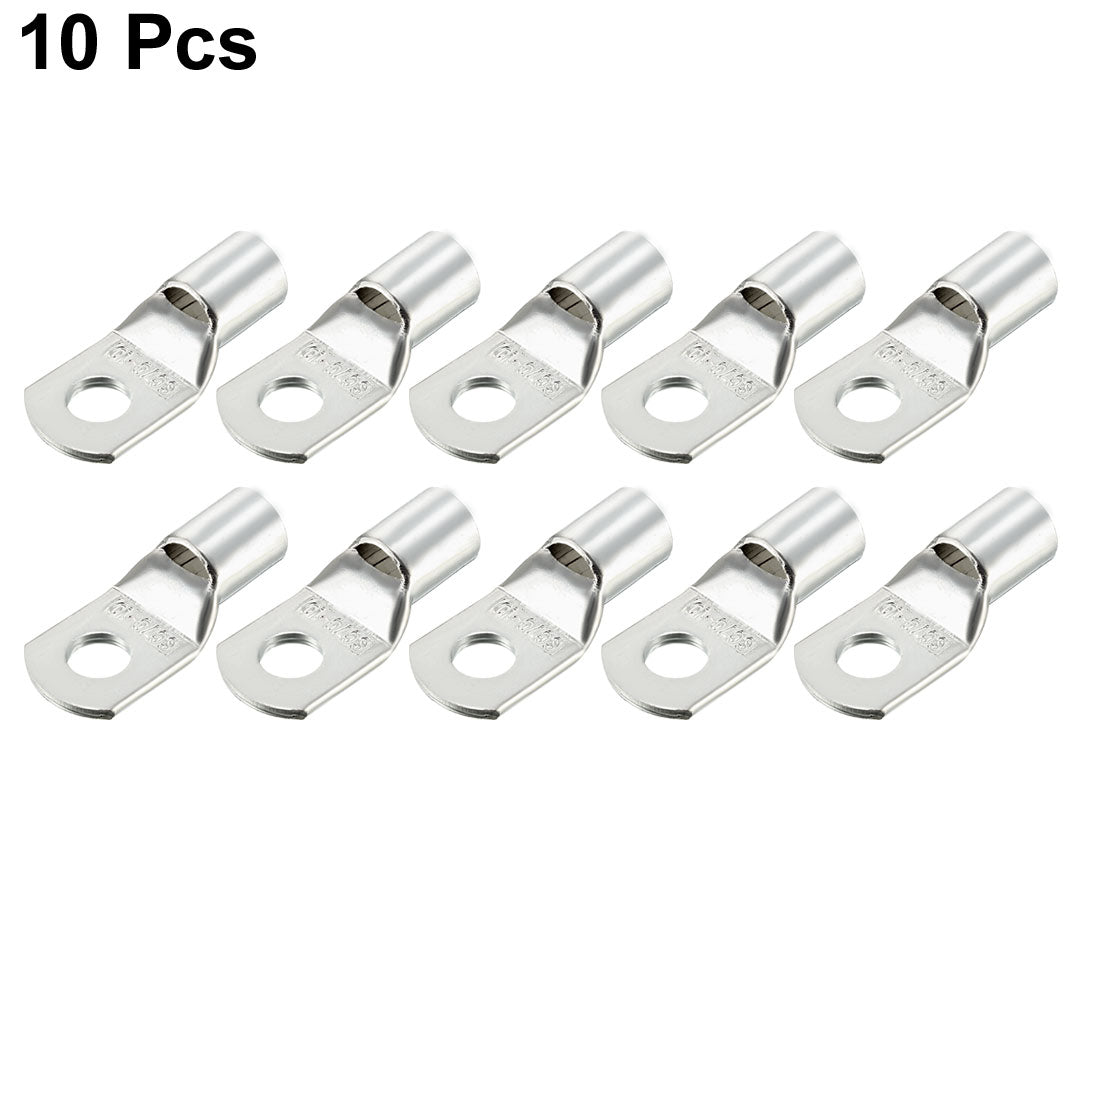 uxcell Uxcell 10Pcs SC70-10 Non-Insulated U-Type Copper Crimp Terminals 50mm Wire Connector Silver Tone